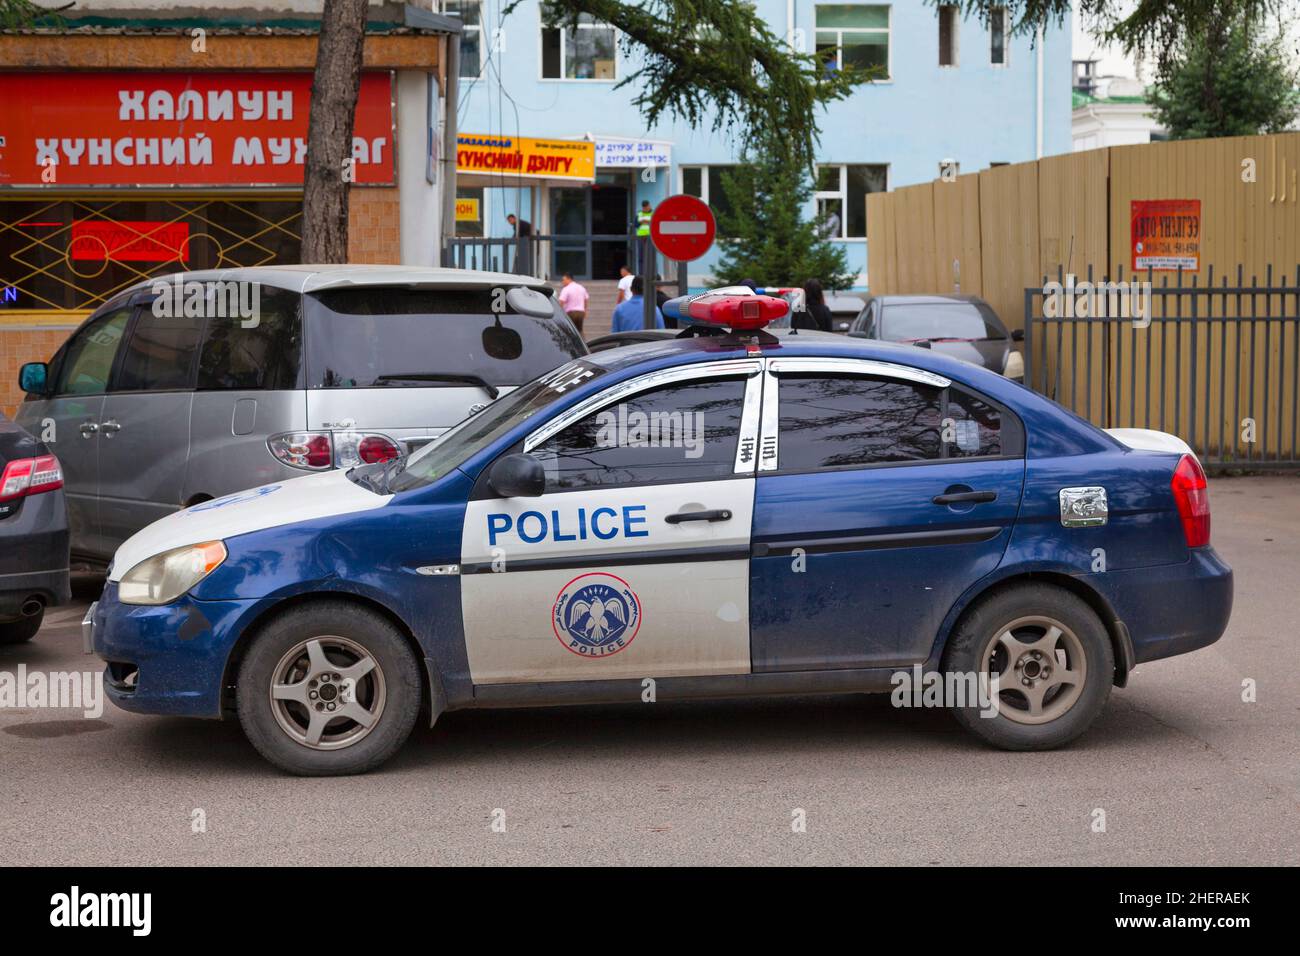 Ulan Bator, Mongolia - July 31 2018: Police car parked outside of a police station in the capital. Stock Photo